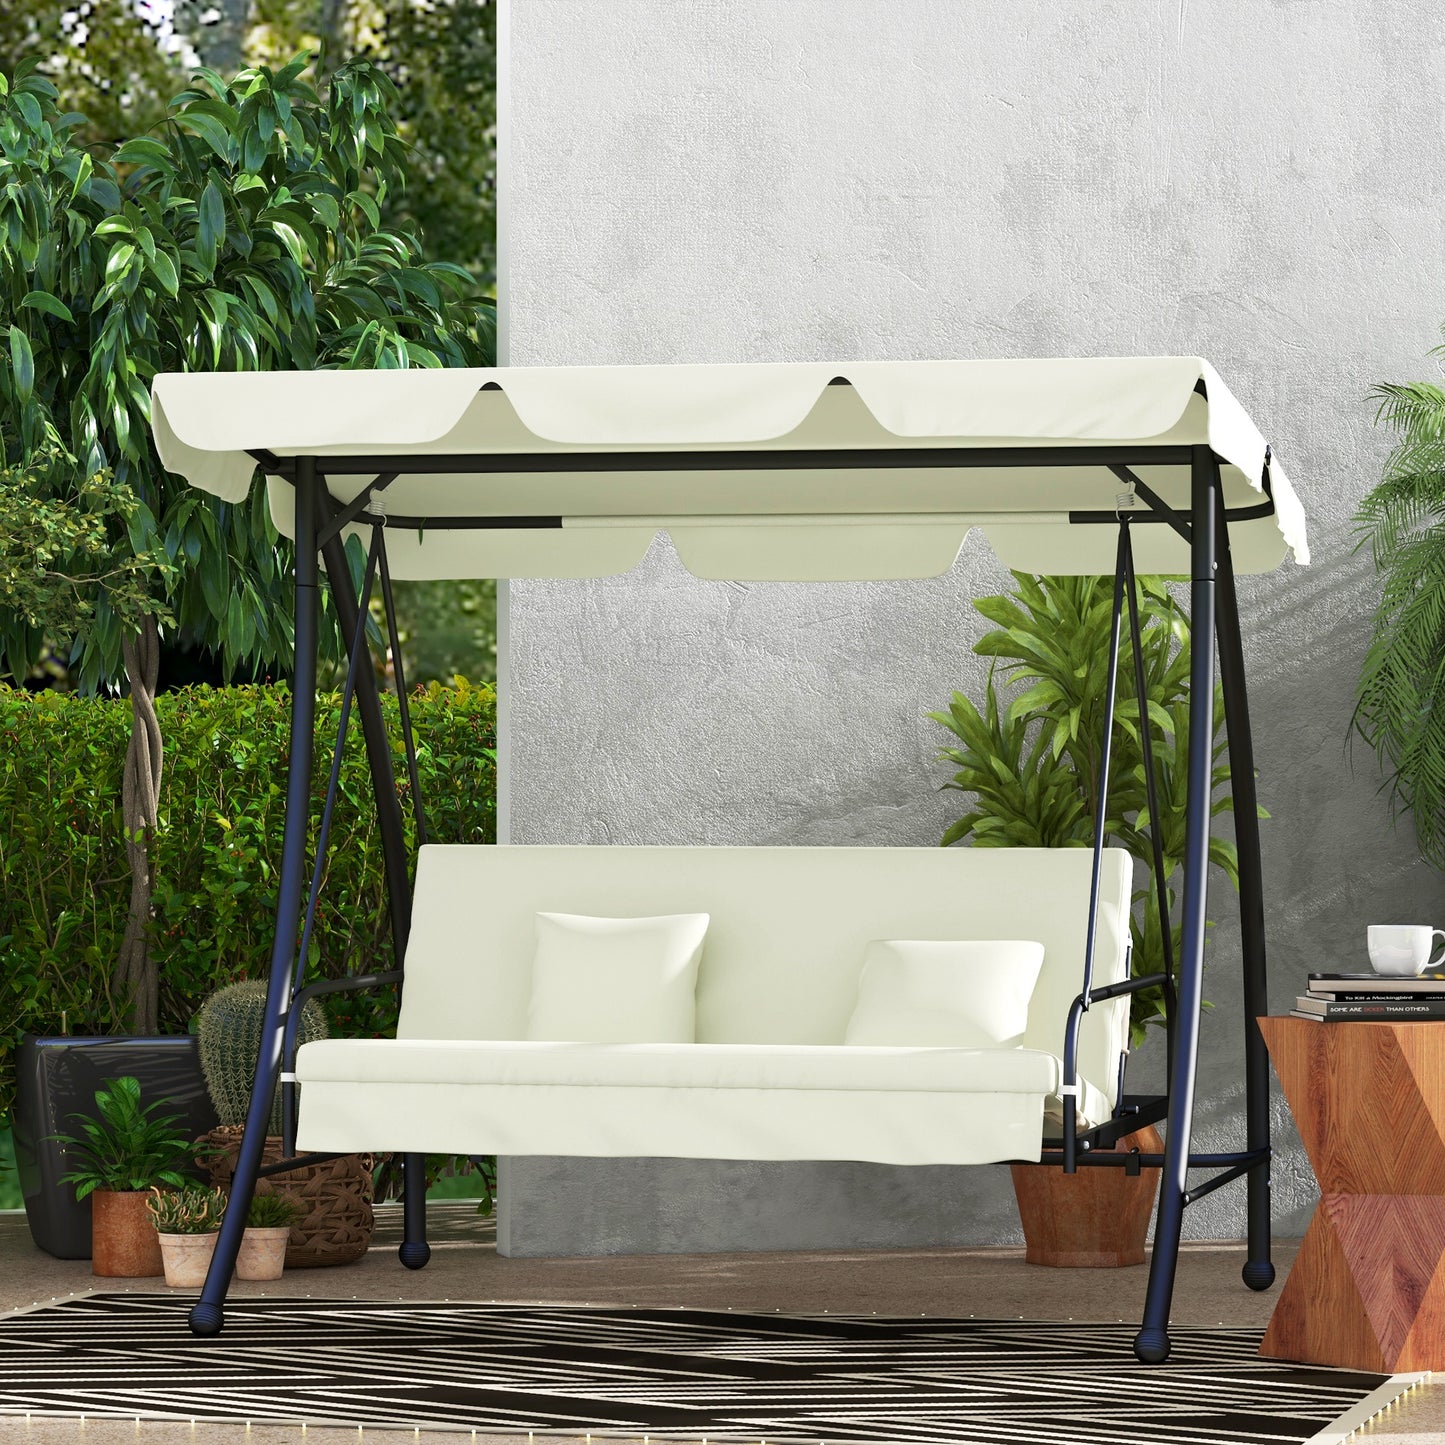 Outsunny 3 Seater Garden Swing Chair with Tilting Canopy - Cream White